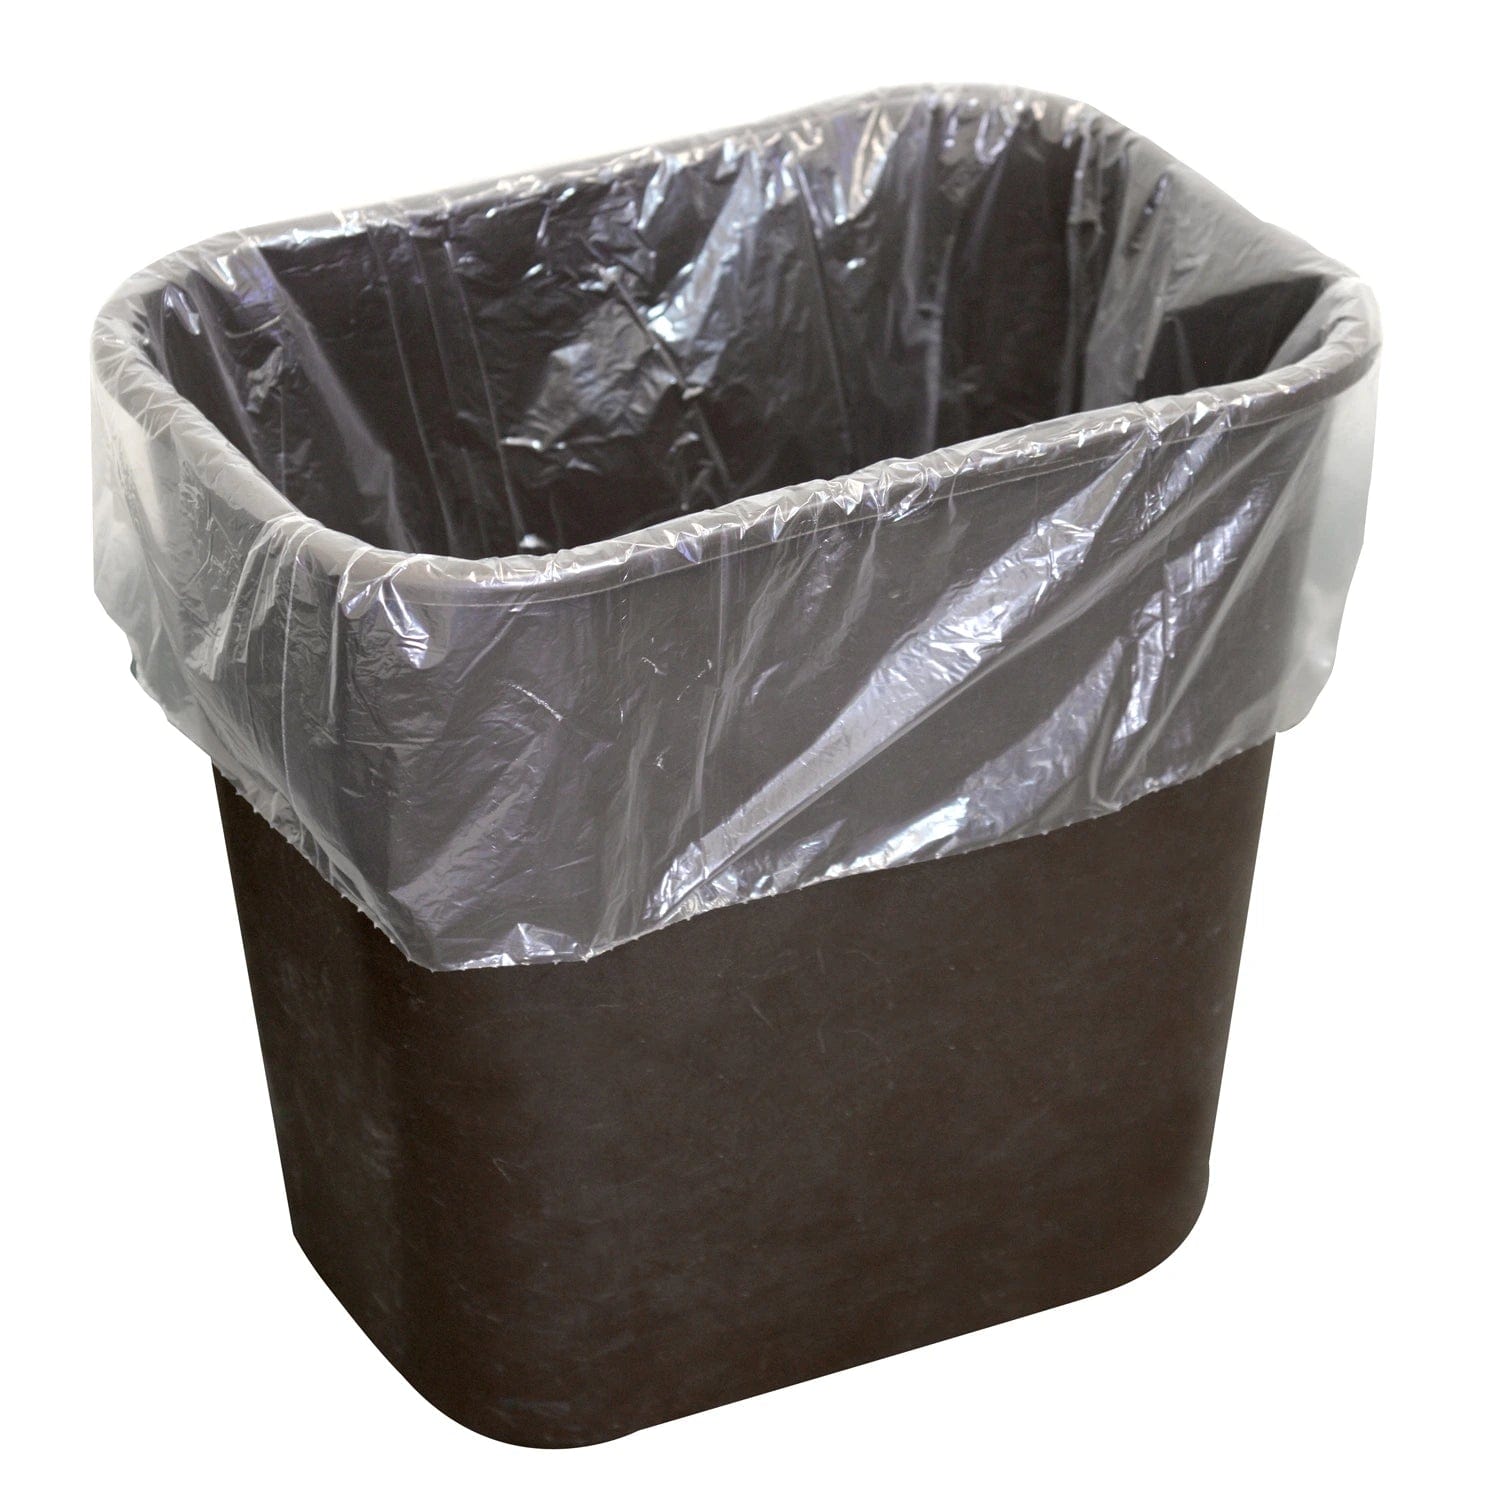 4 Gallons 1 Mil Clear Low Density Trash Bags 13x4x17 - 1,000 Bags/Case